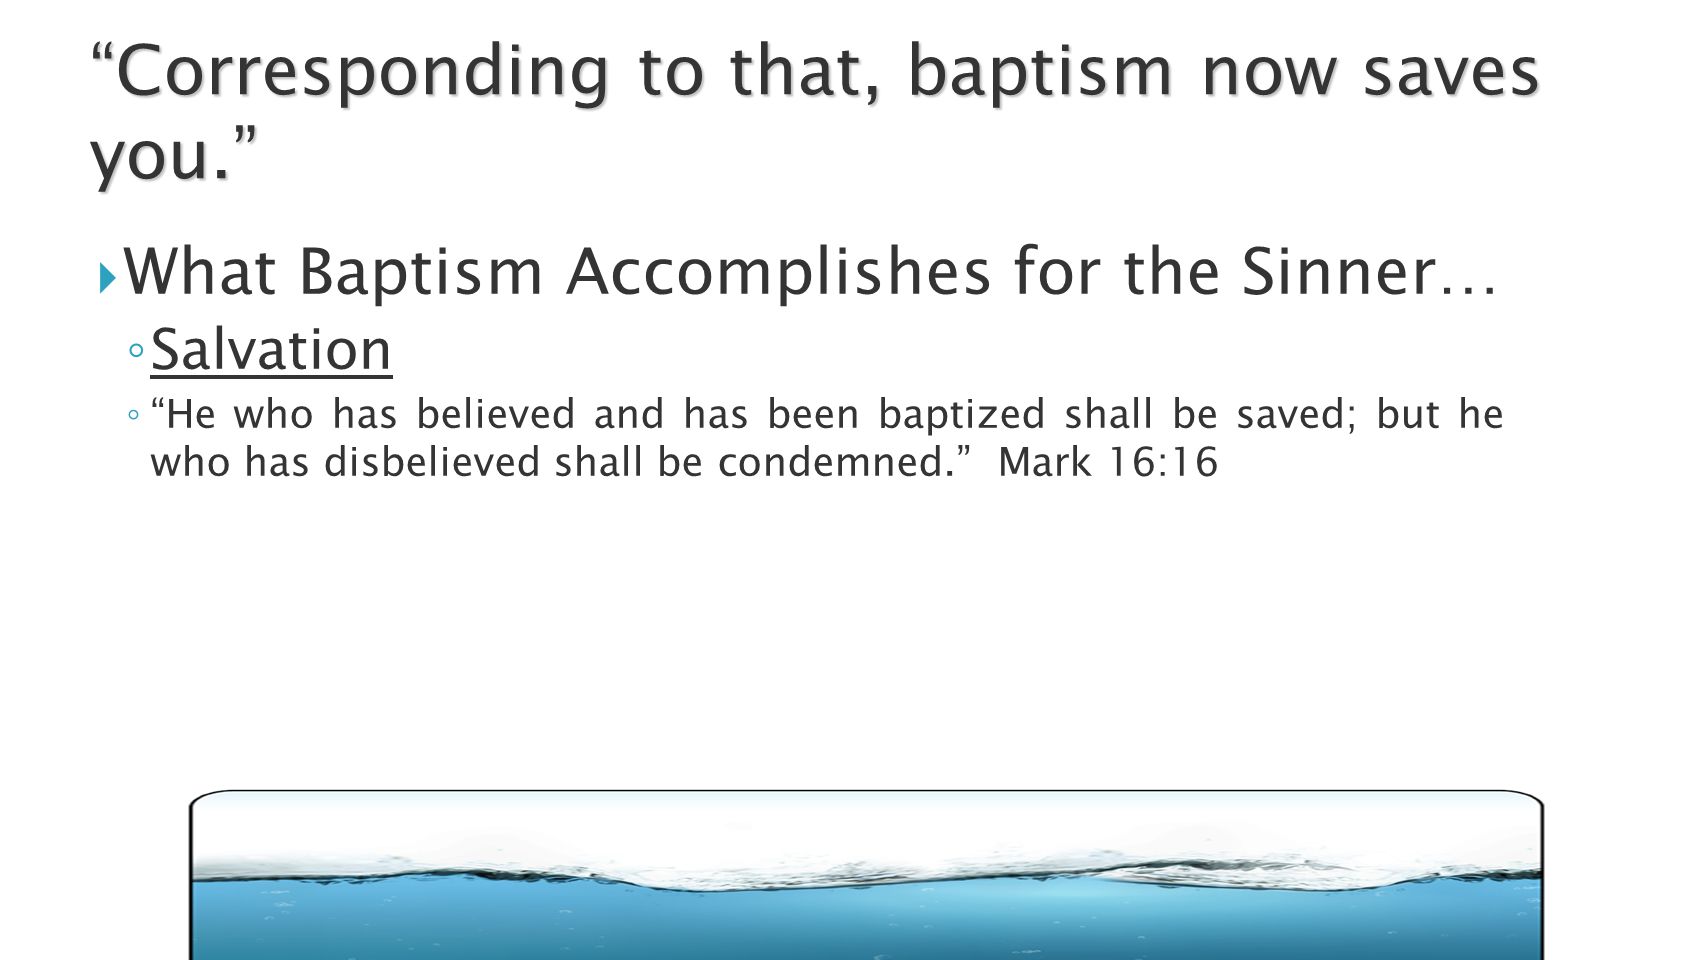  What Baptism Accomplishes for the Sinner… ◦ Salvation ◦ He who has believed and has been baptized shall be saved; but he who has disbelieved shall be condemned. Mark 16:16 Corresponding to that, baptism now saves you.